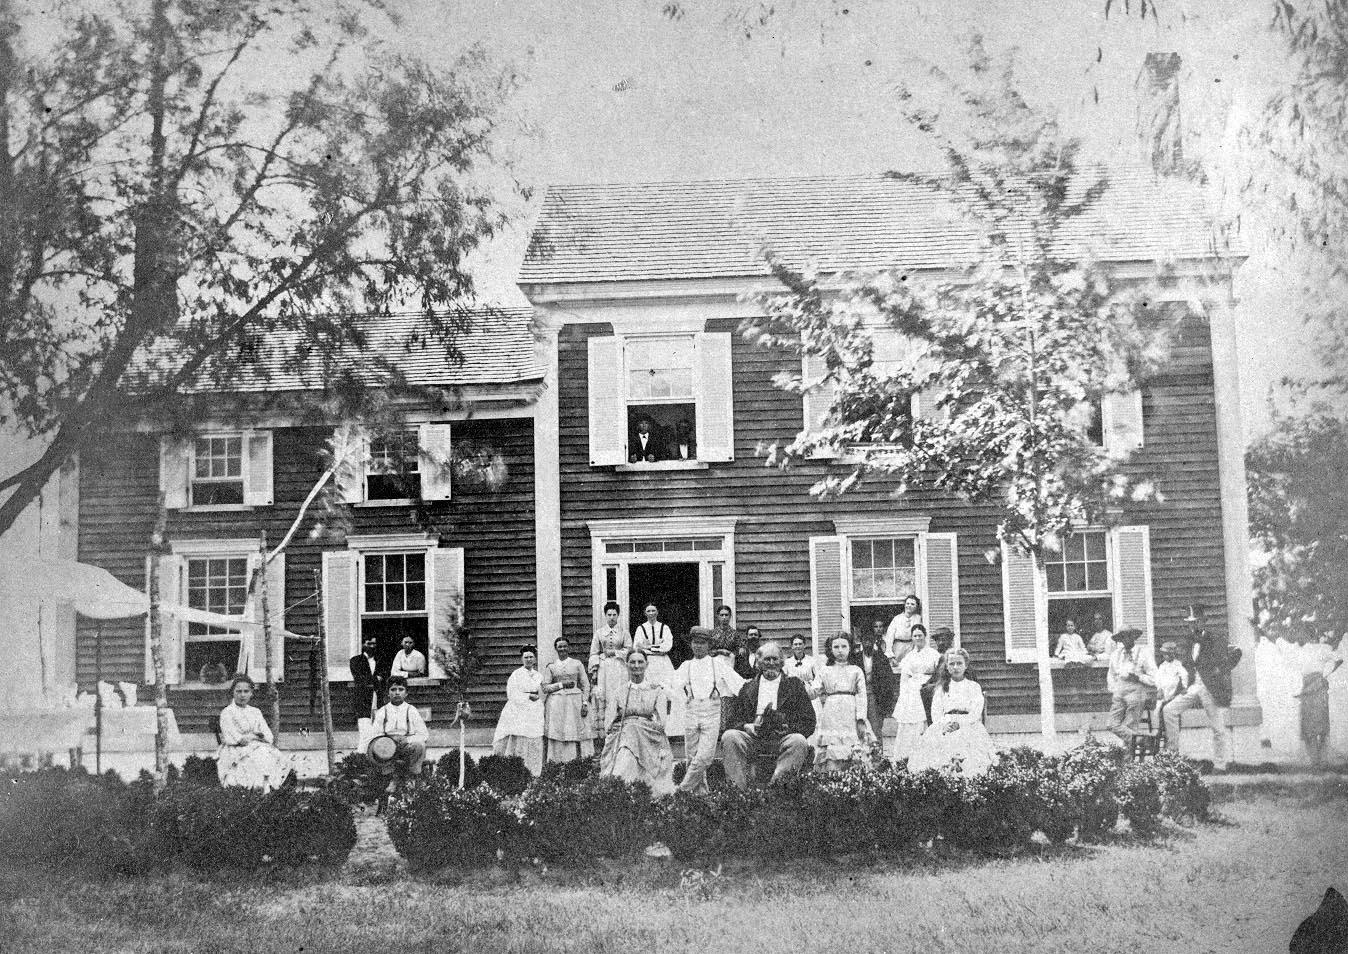 Photo of the 50th Wedding Anniversary Party of Mary and Lemuel Hubbard in 1873